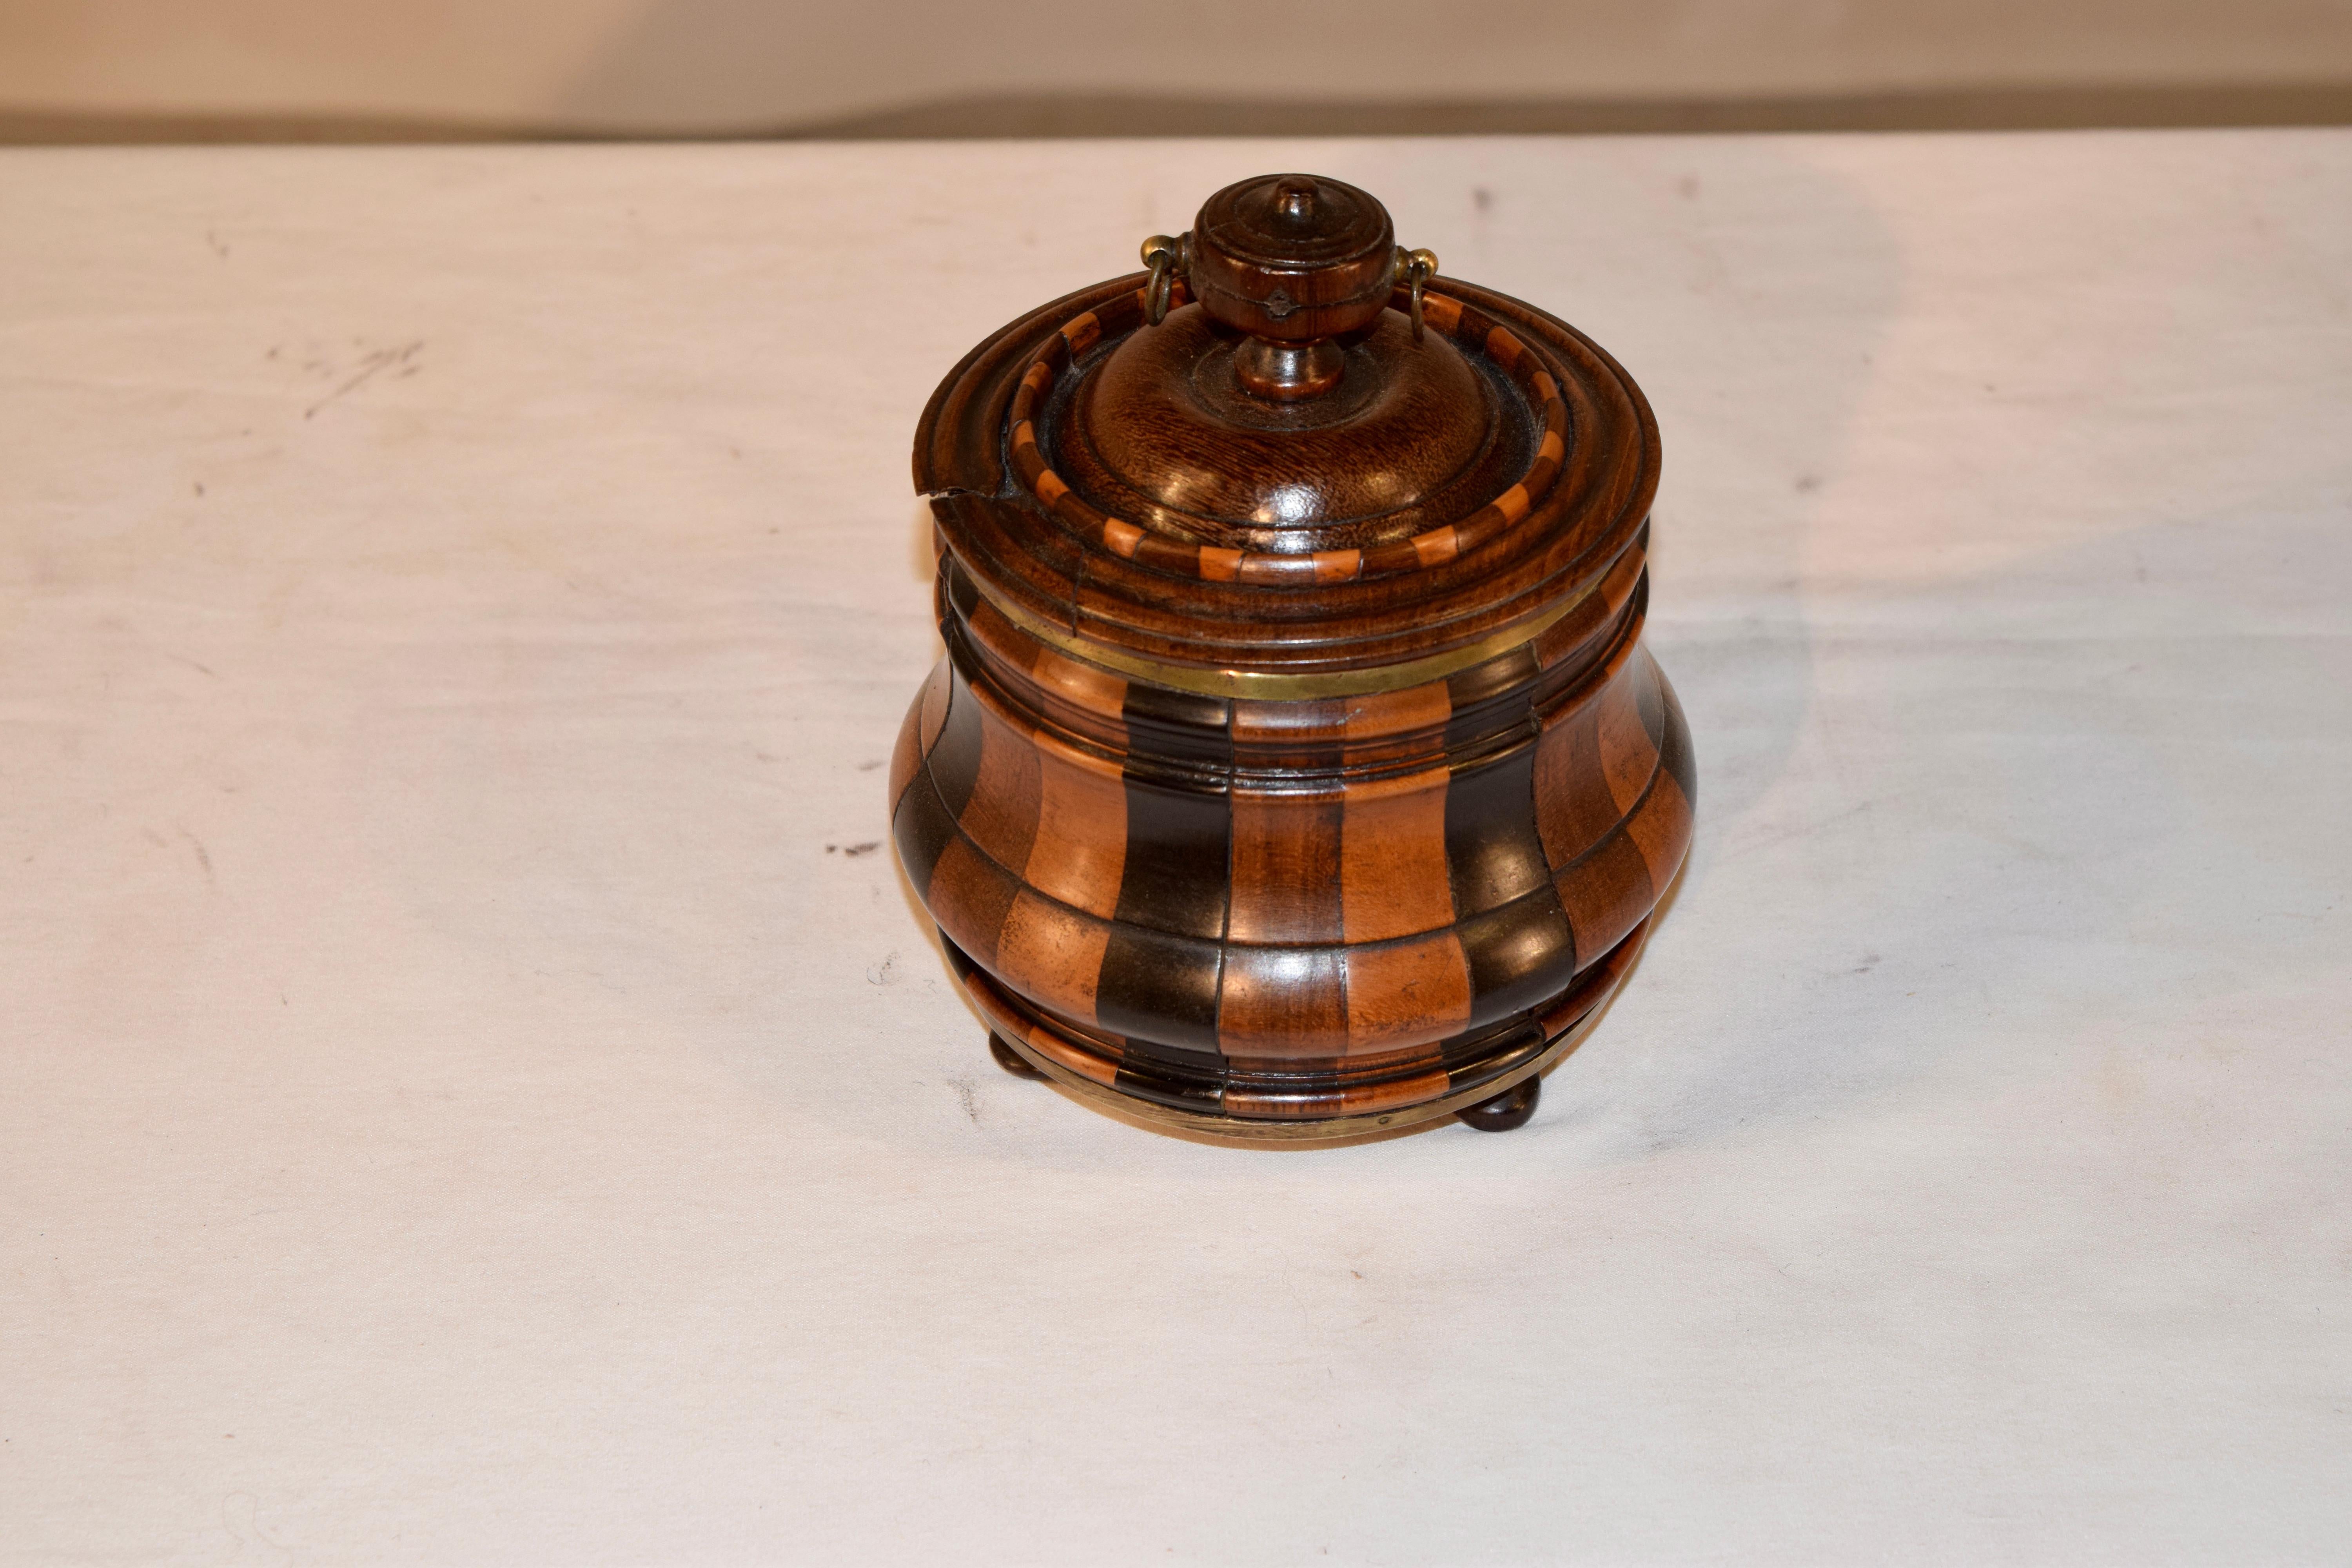 19th century turned treen lidded jar with a hand turned top which is adorned with a hand turned finial and striped banding, over staves made from three different types of wood, banded together with handmade brass bands. The jar retains its original